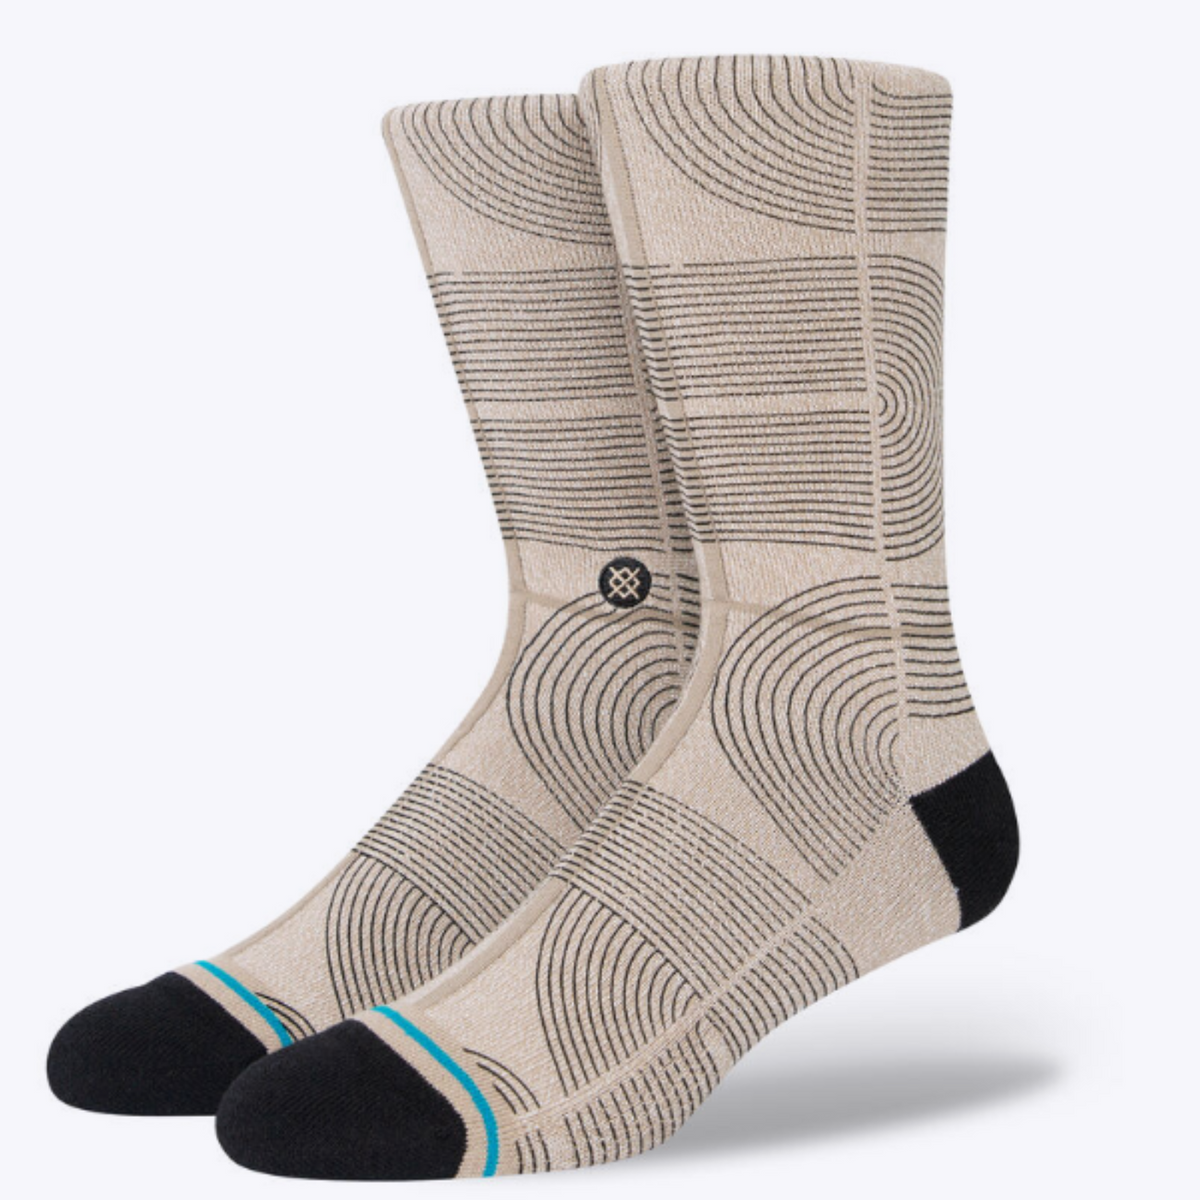 Stance Zen men&#39;s crew sock featuring beige sock with black toe and heel and black mid-century modern style geometric lines all over. Socks shown on display feet. 